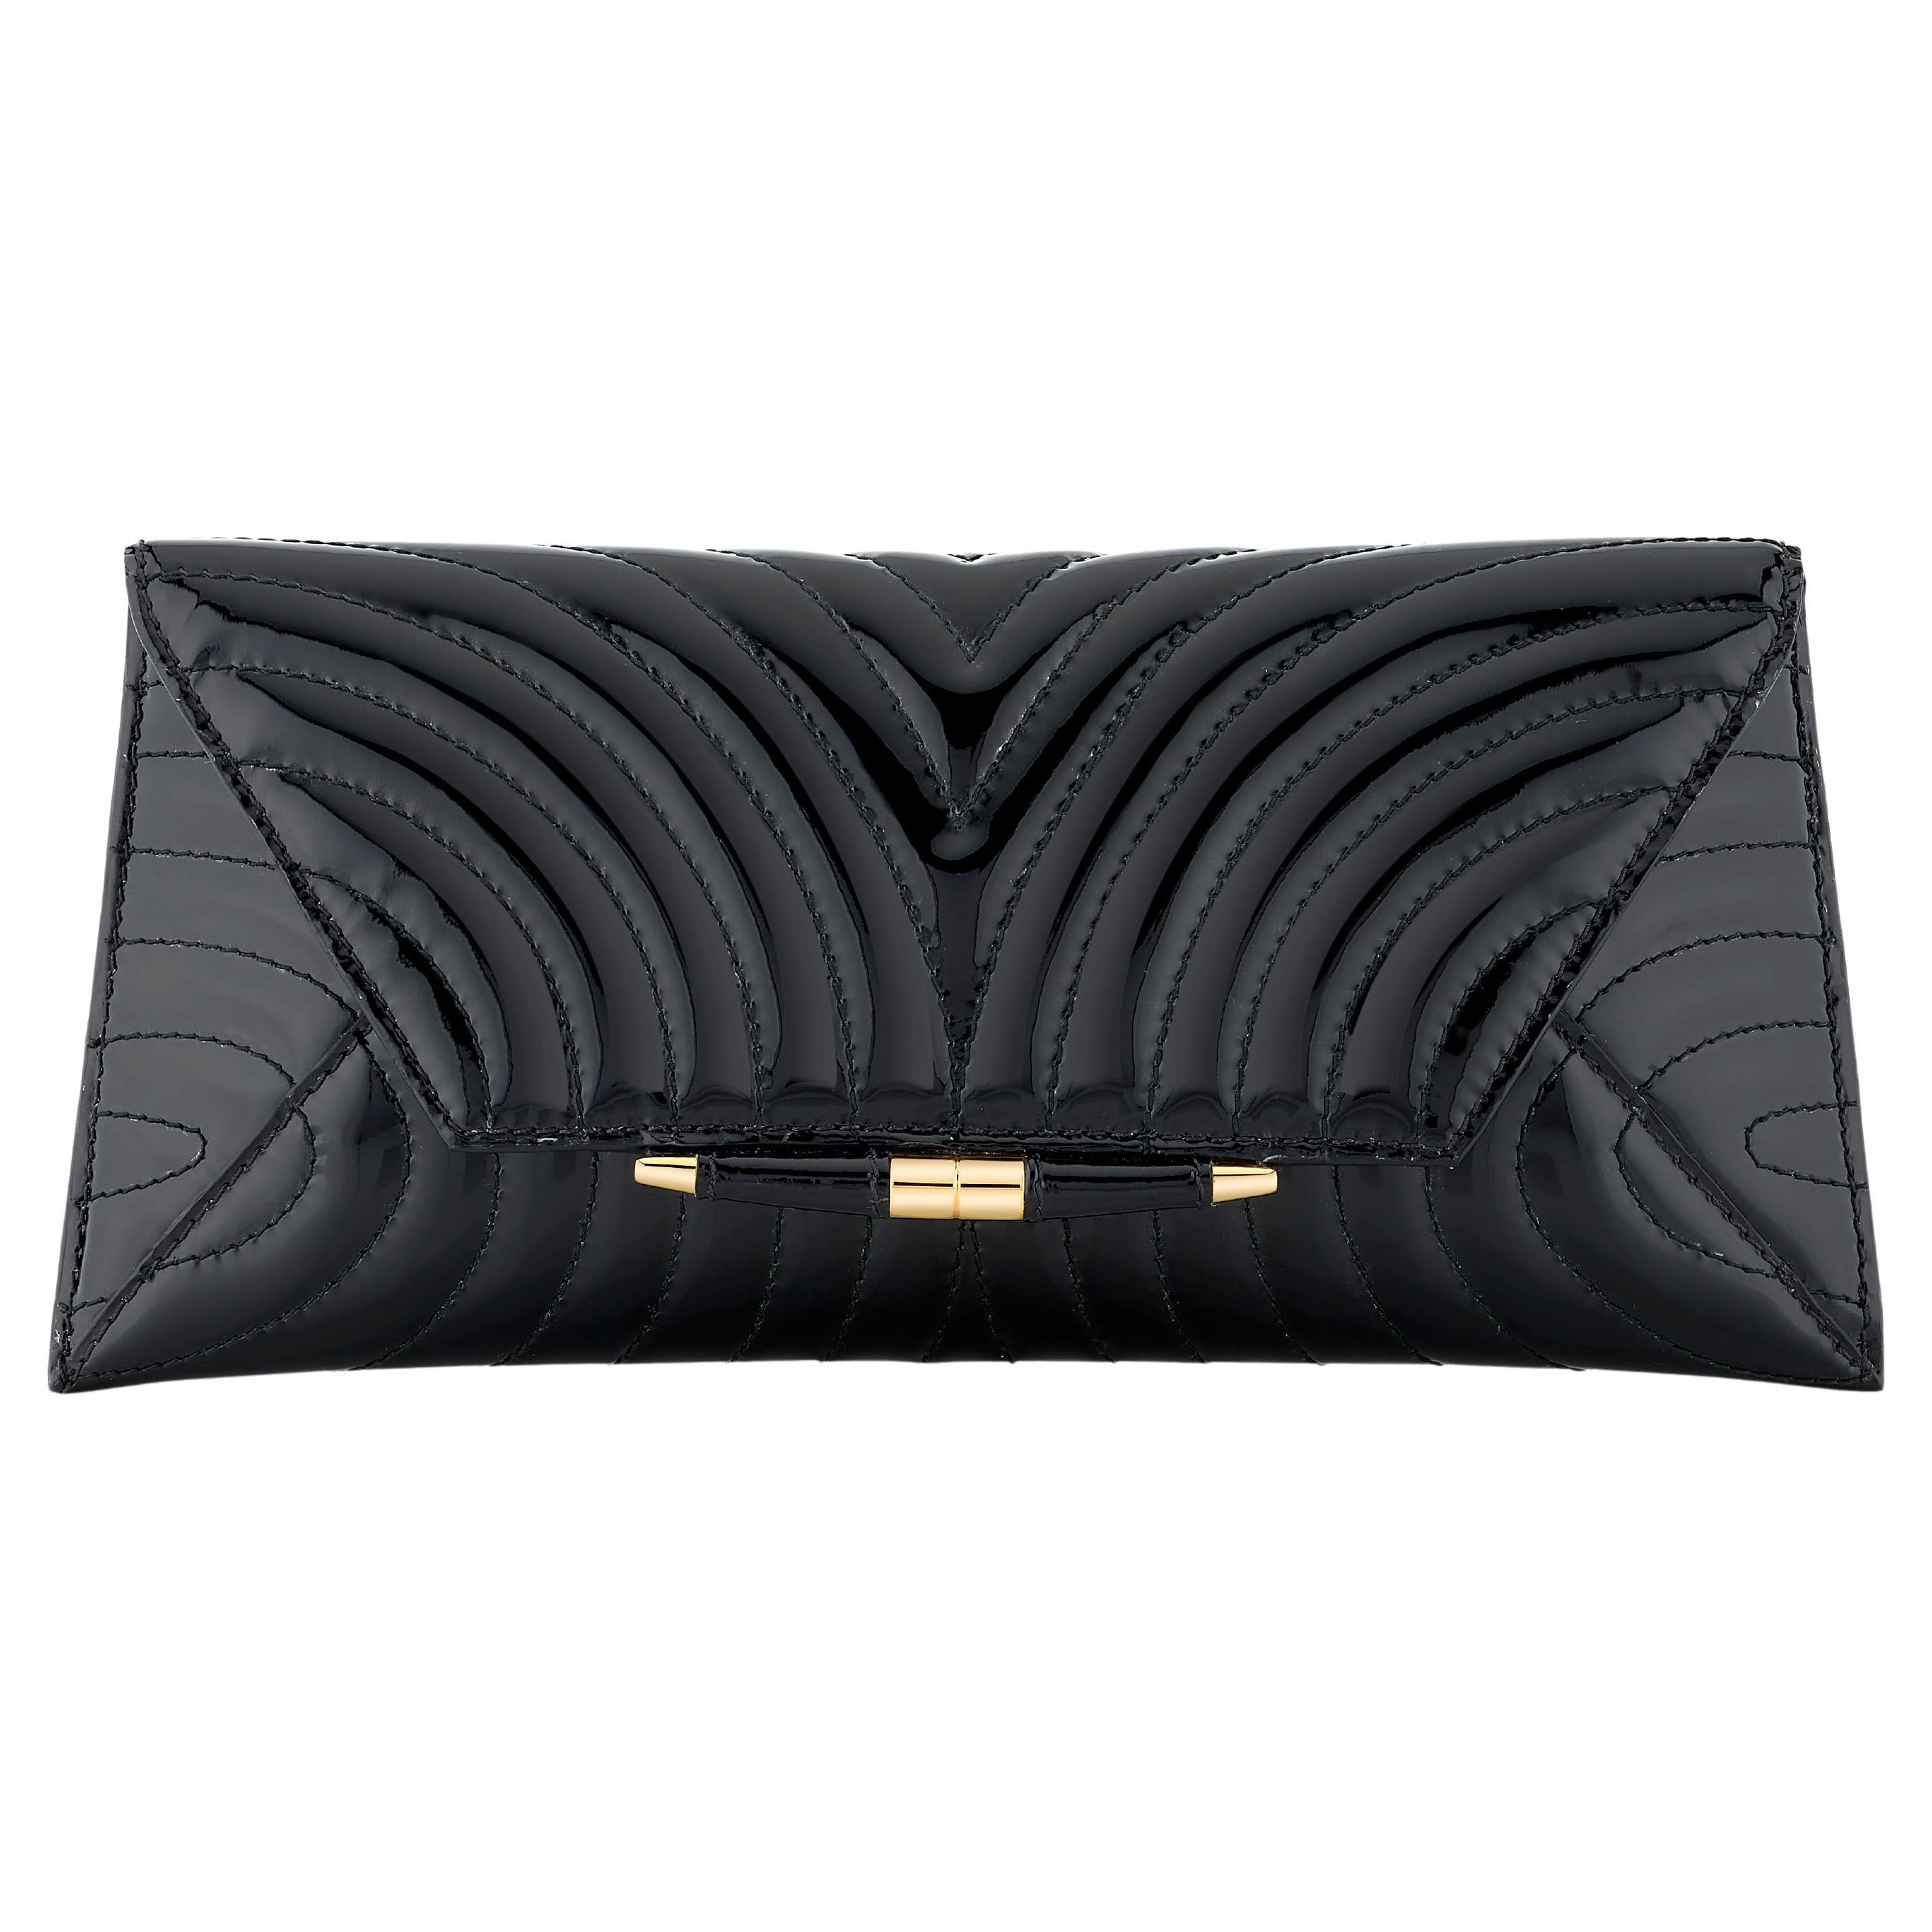 TYLER ELLIS Aimee Clutch in Black Quilted Patent Leather with Gold Hardware